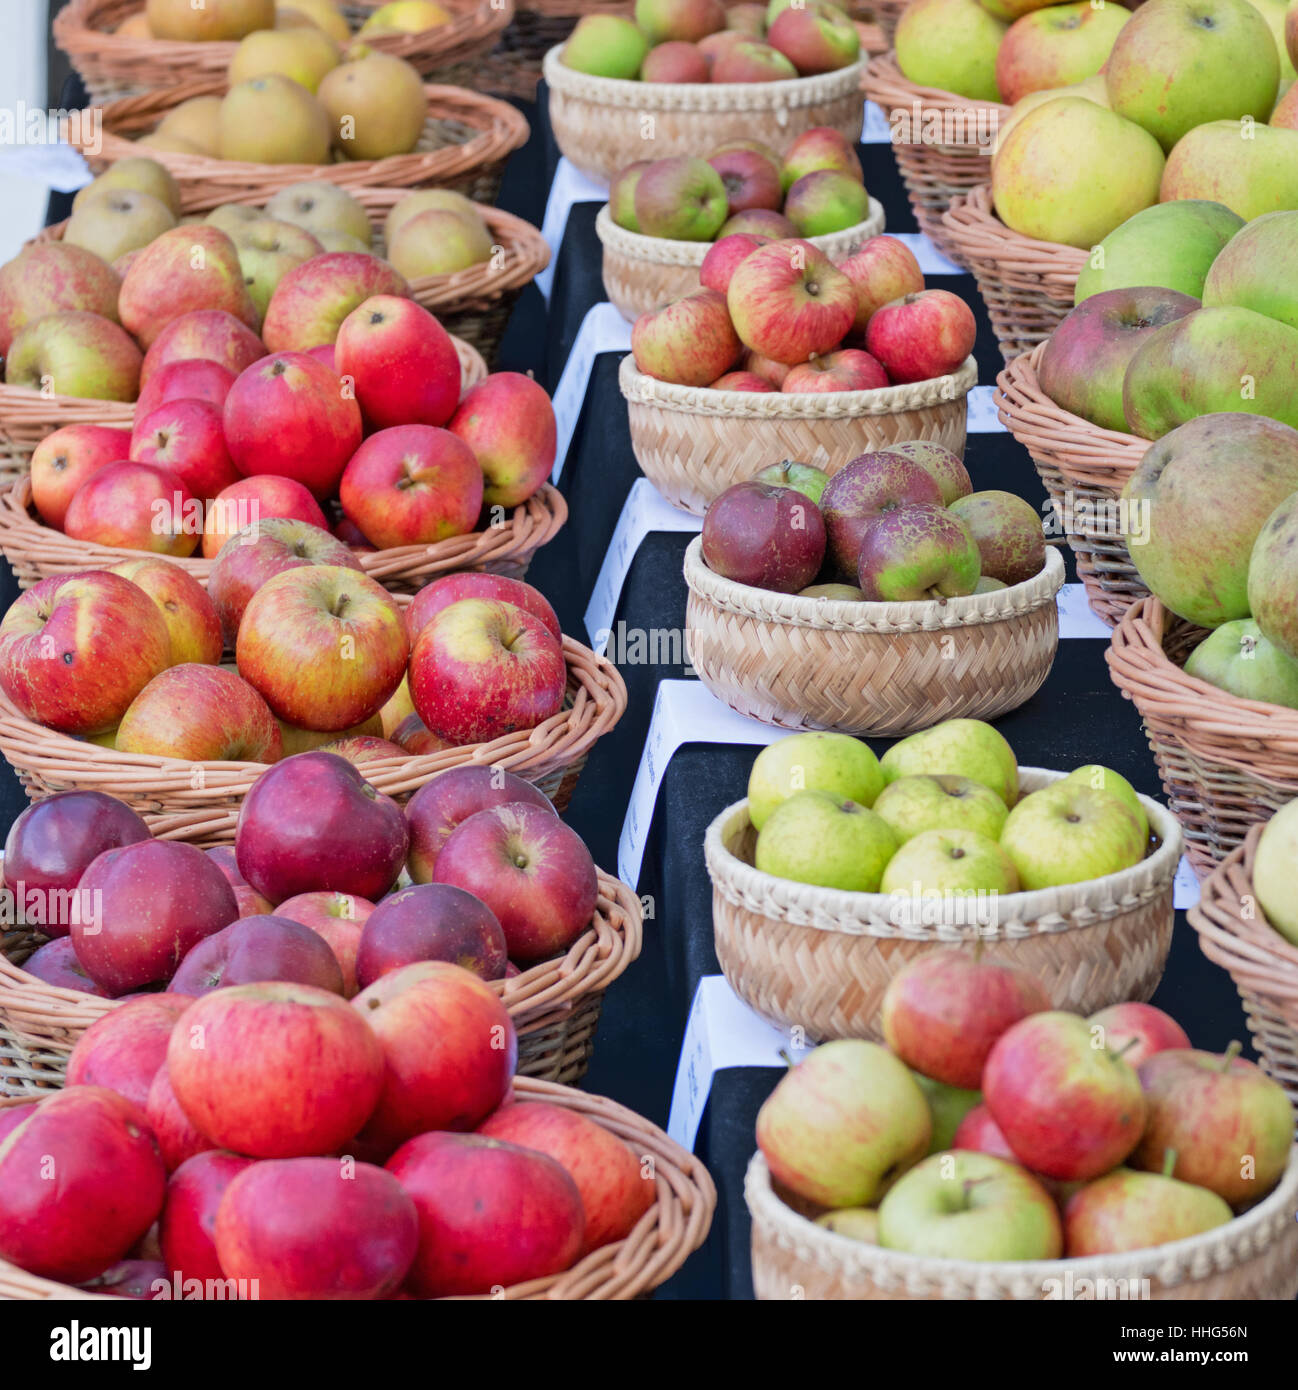 Baskets of different varieties of eating and cooking apples on display at an English autumn fair Stock Photo